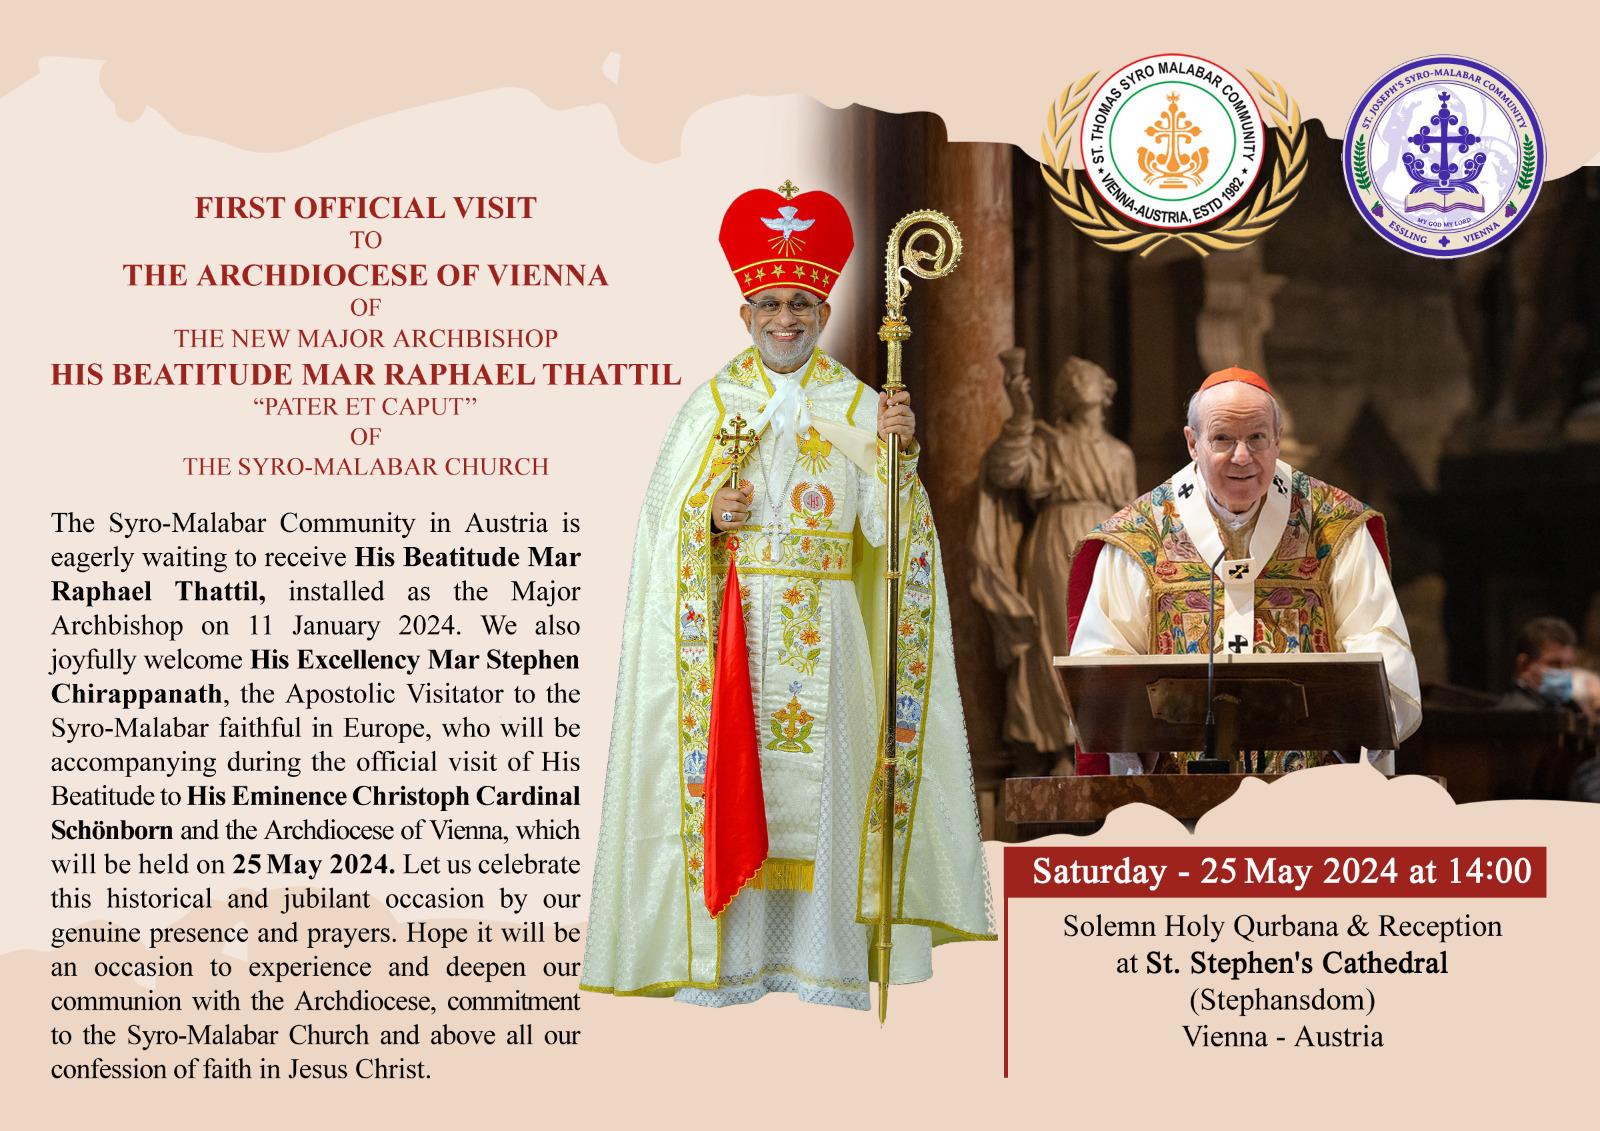 Invitation to Holy Mass with Major Archbishop Raphael Thattil